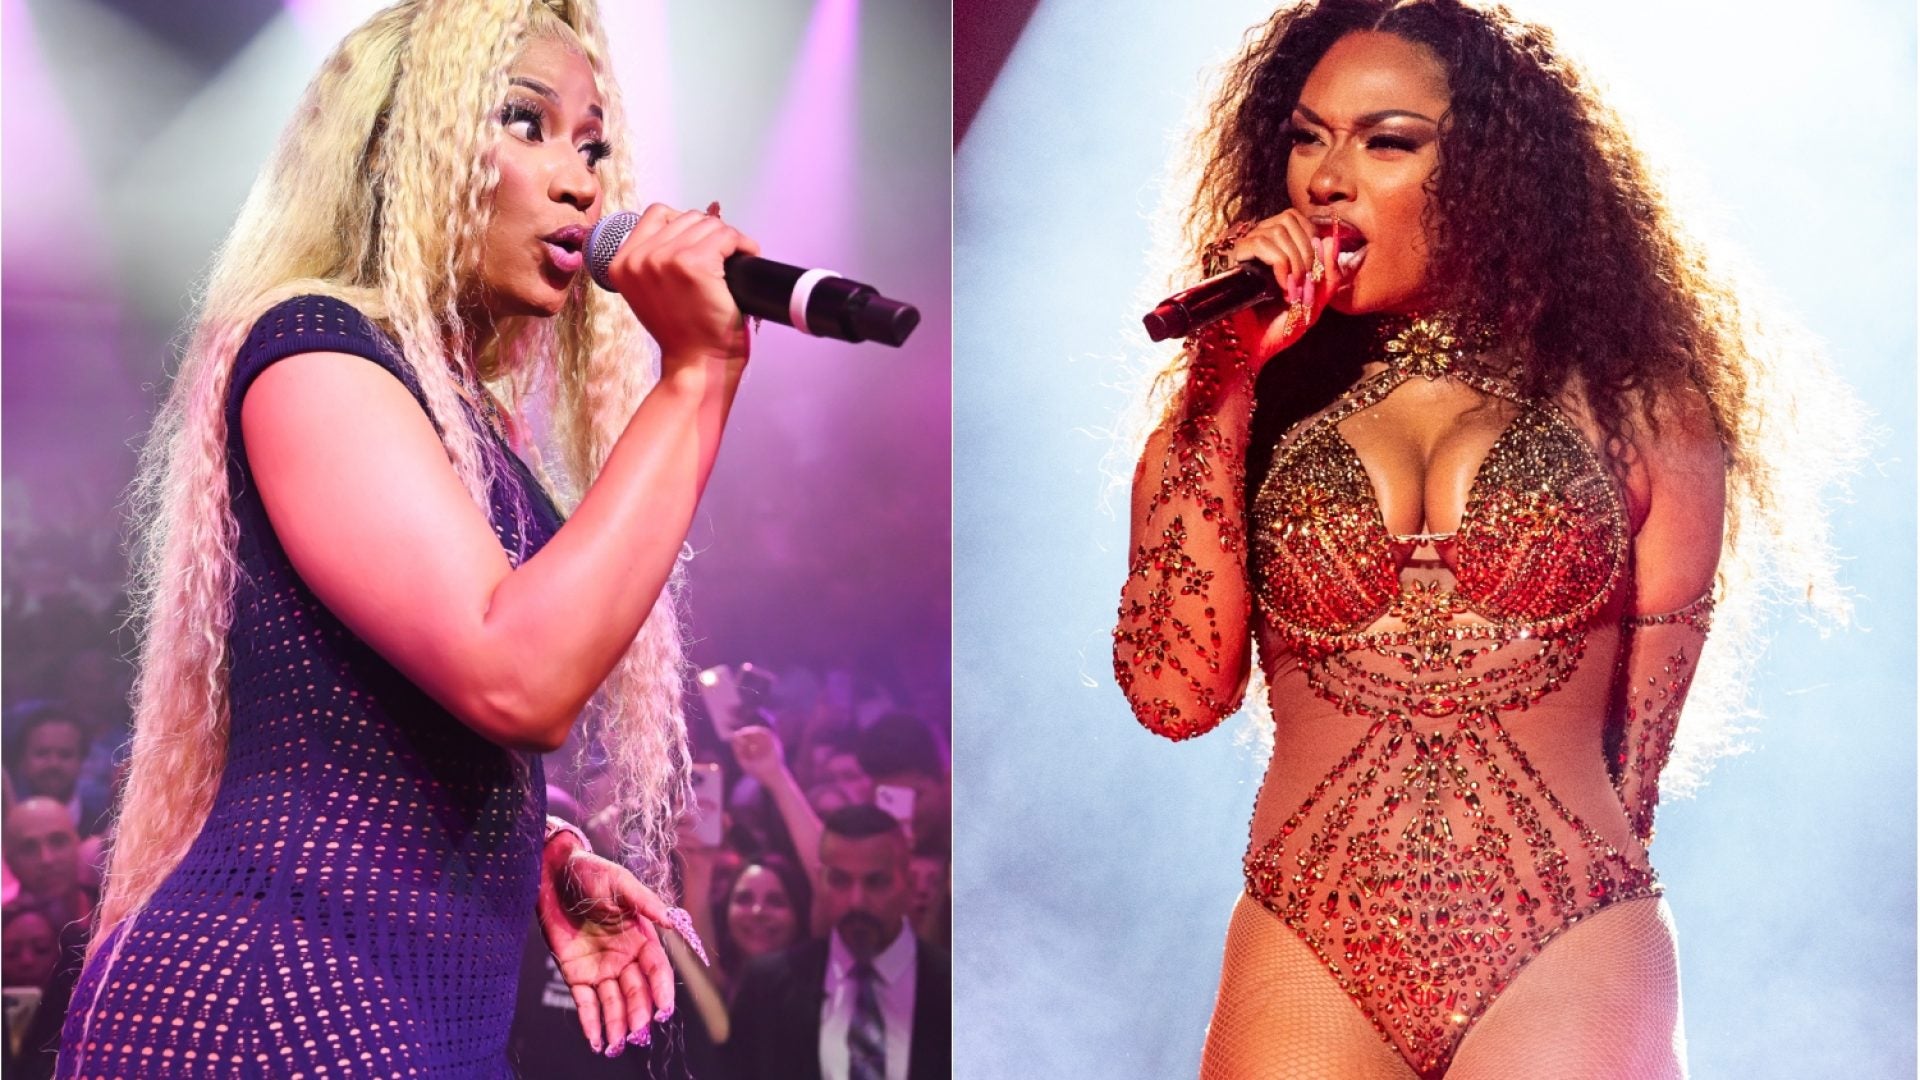 Op-Ed: The Celebrity Worship We're Witnessing Is More Concerning Than The Nicki Minaj, Megan Thee Stallion Beef 